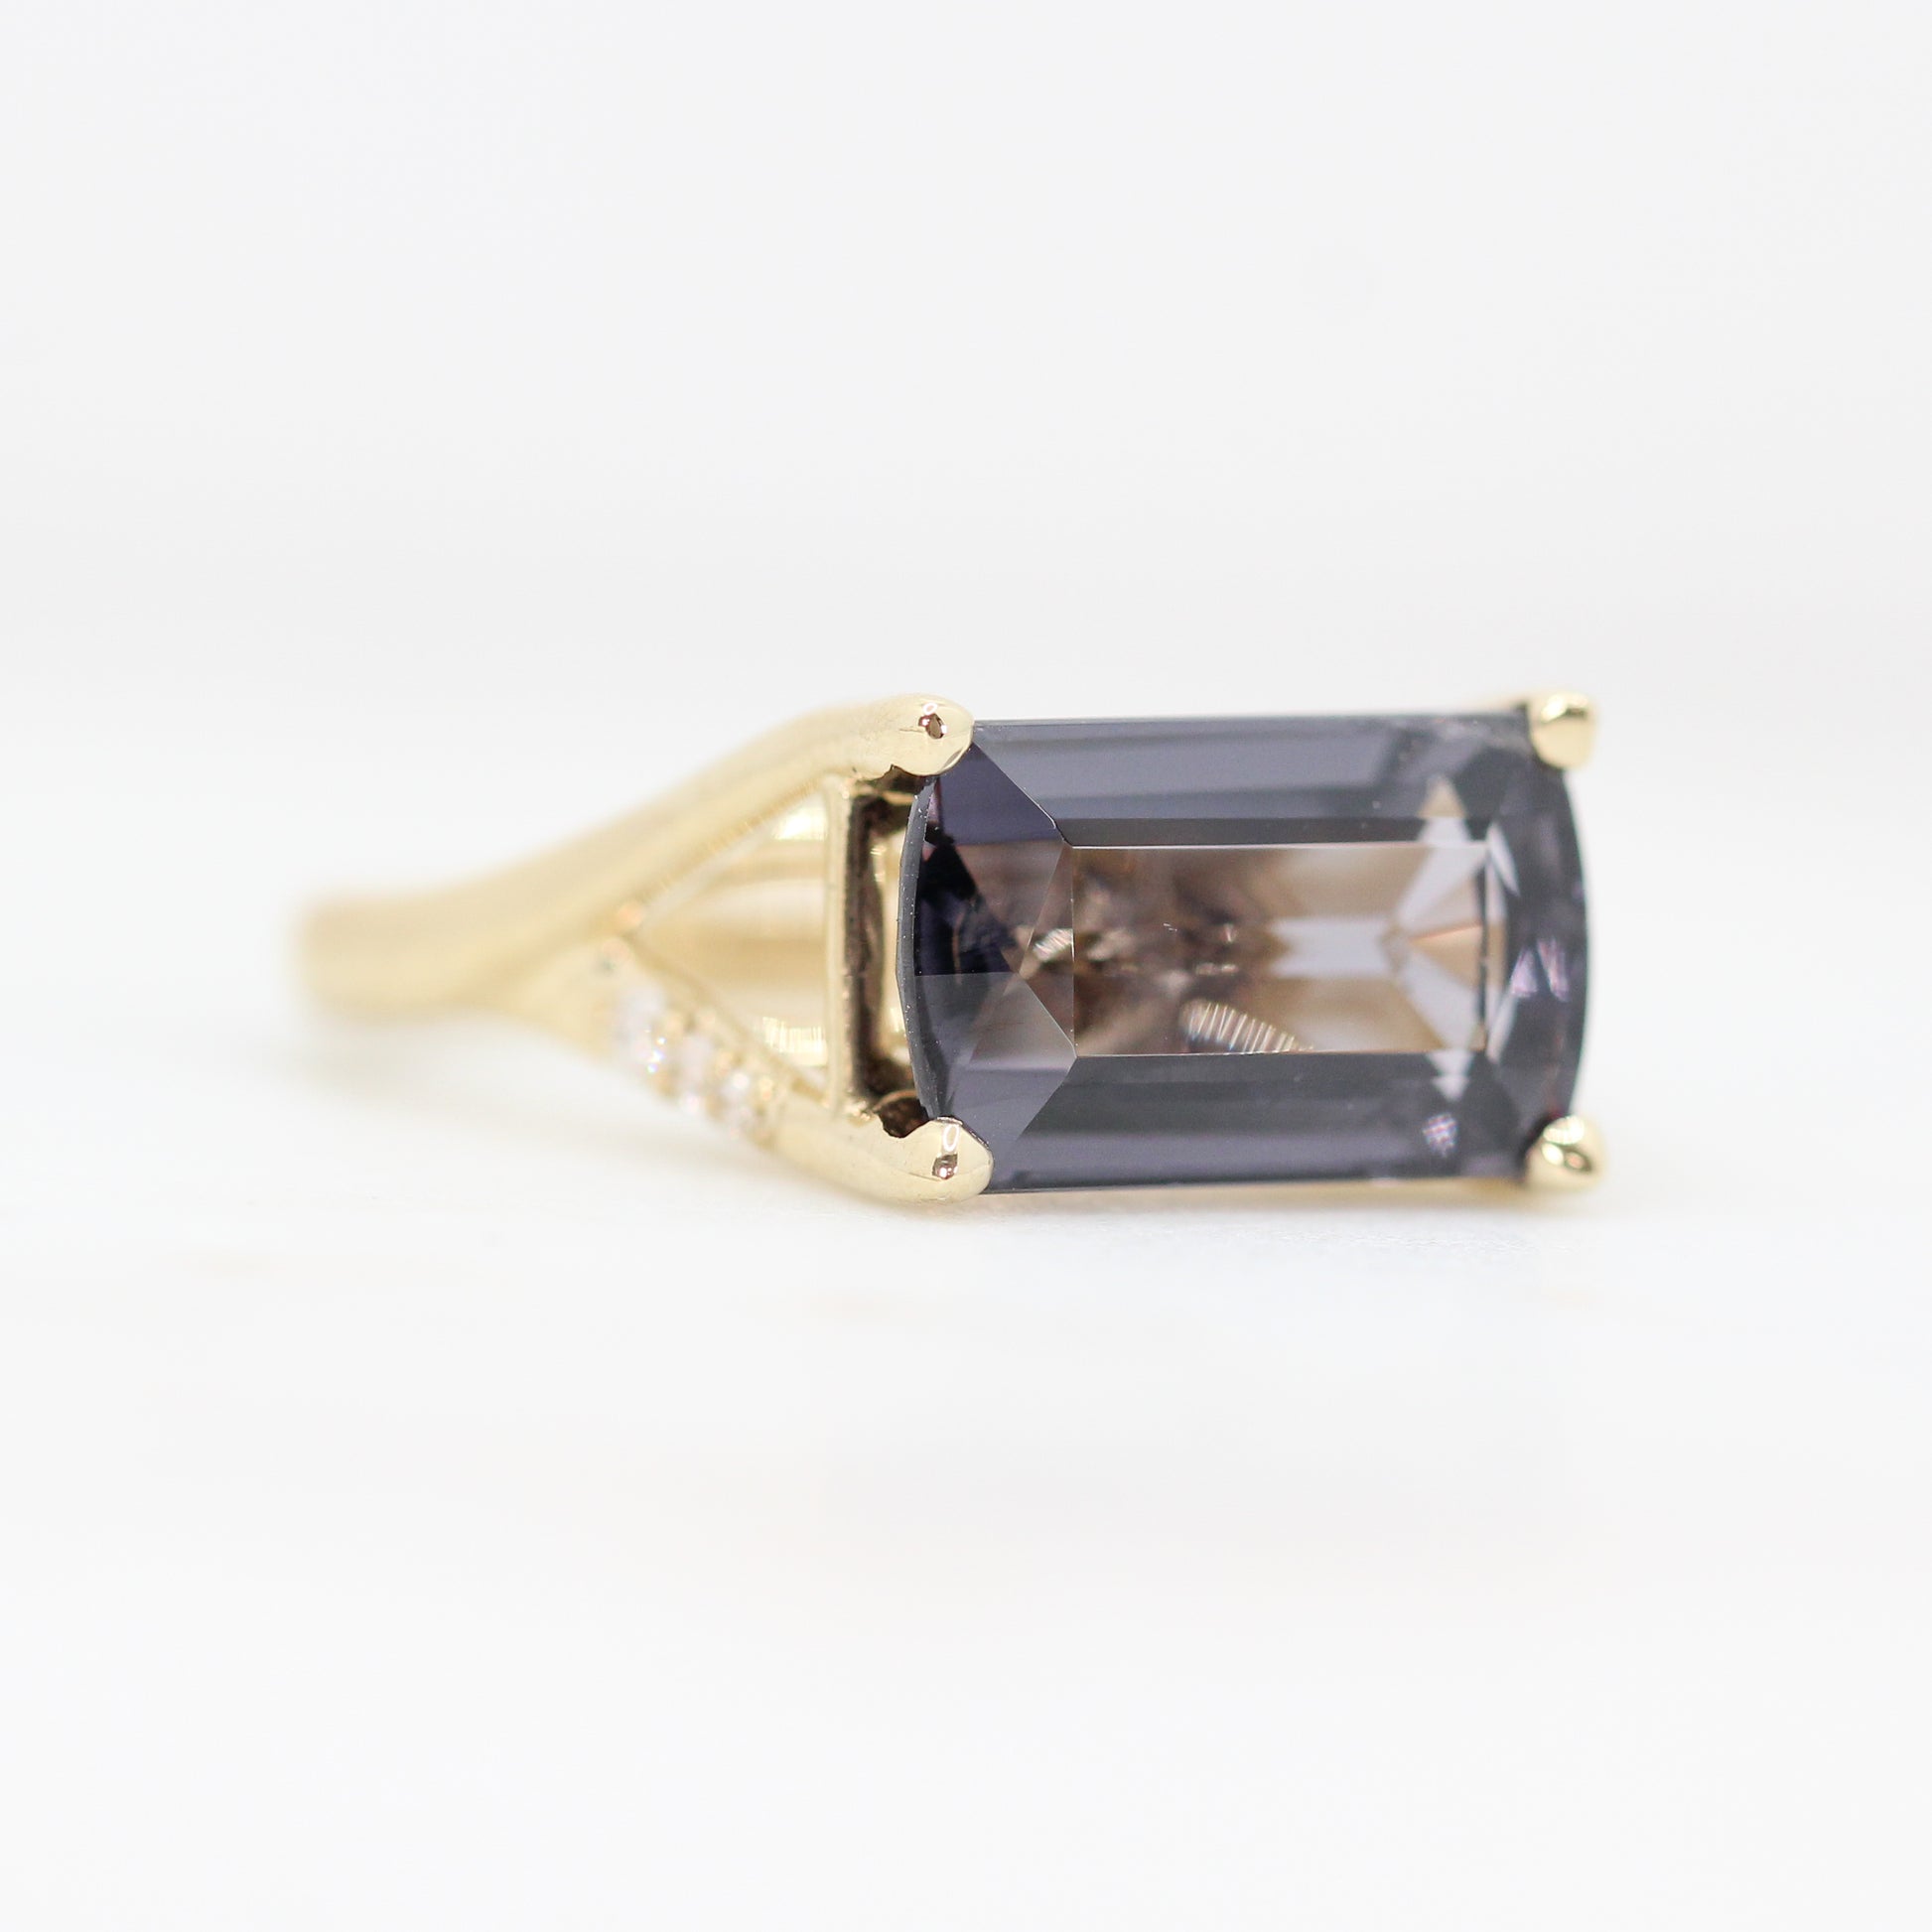 Kennedy Ring with a Carat Spinel and White Diamonds in 14k Yellow Gold - Ready to Size and Ship - Midwinter Co. Alternative Bridal Rings and Modern Fine Jewelry